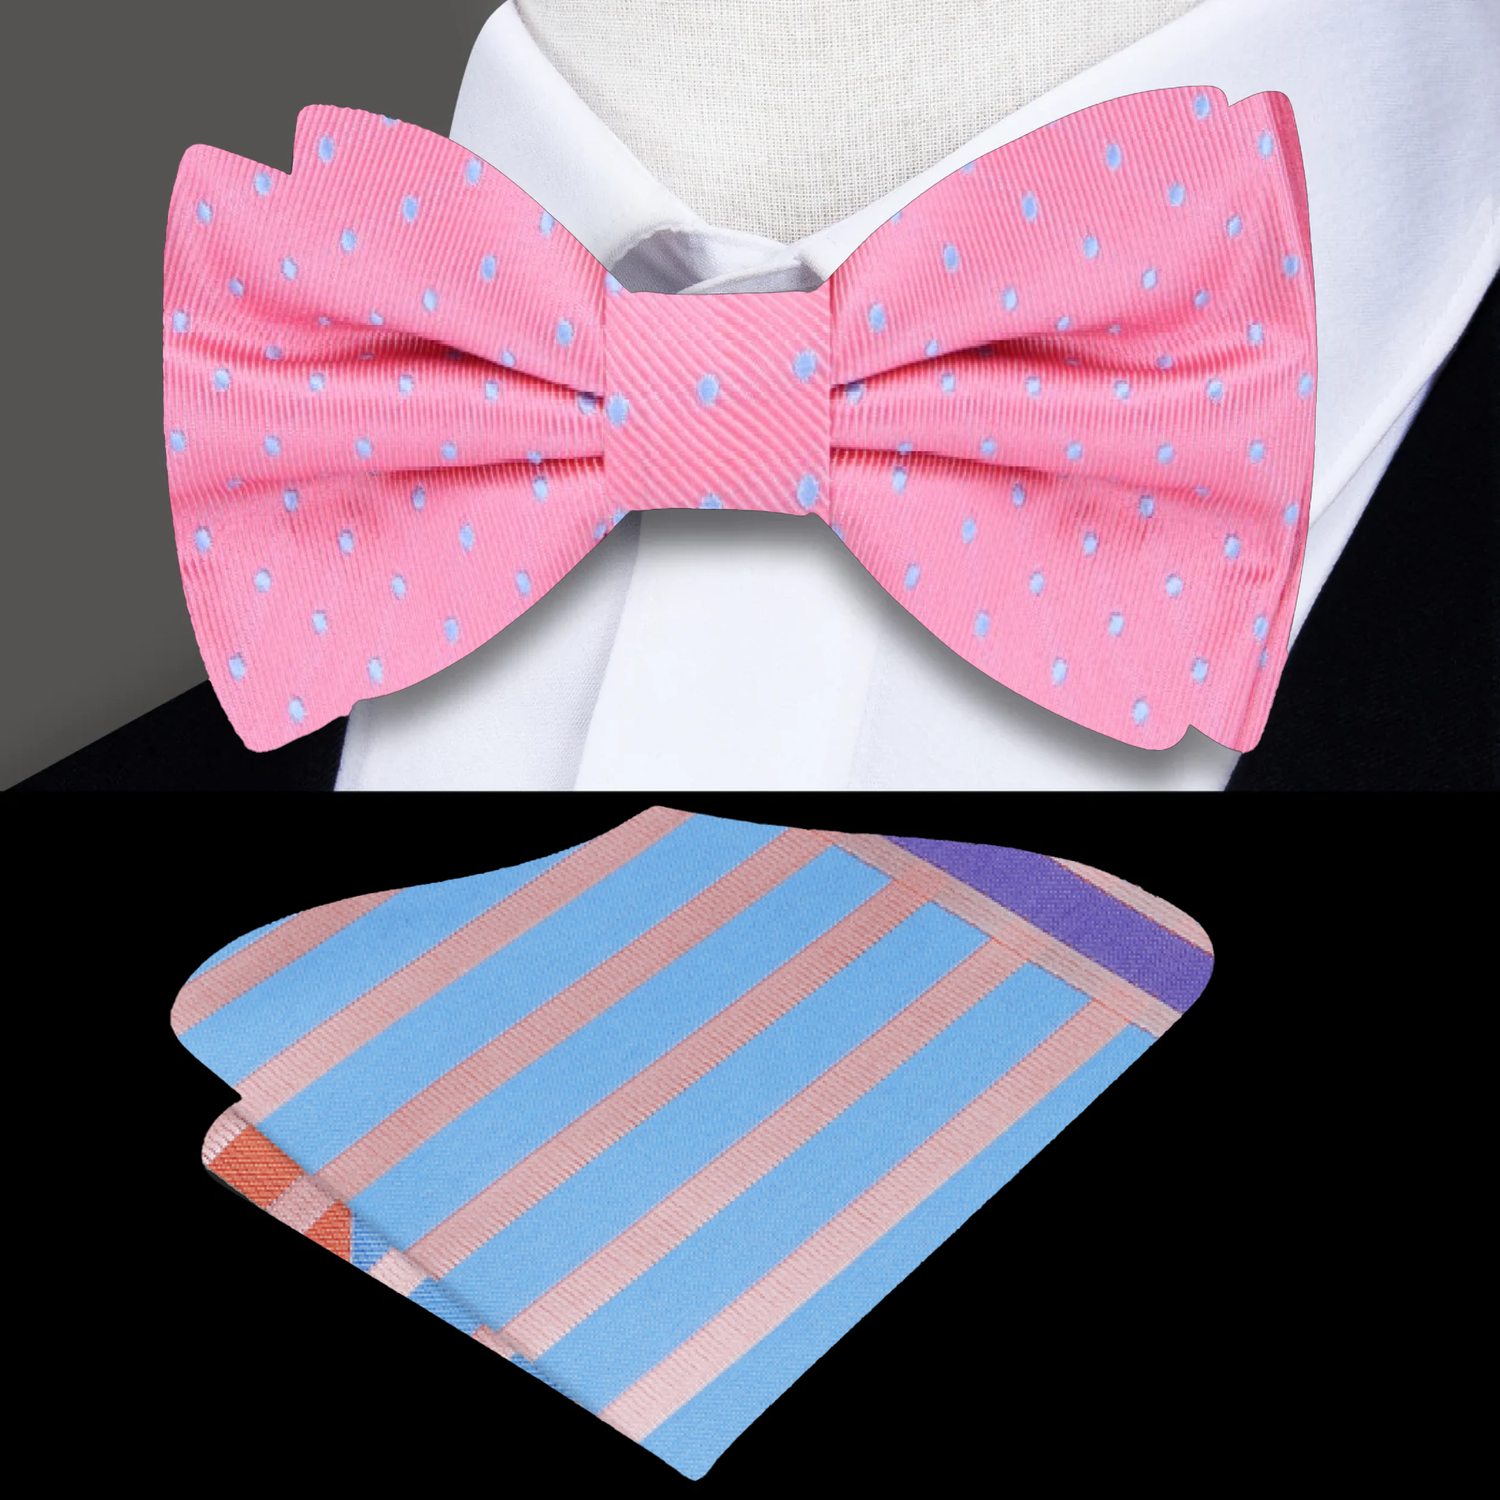 Gumball Pink, Rich Light Blue Polka Dots Bow Tie and Abstract Pocket Square